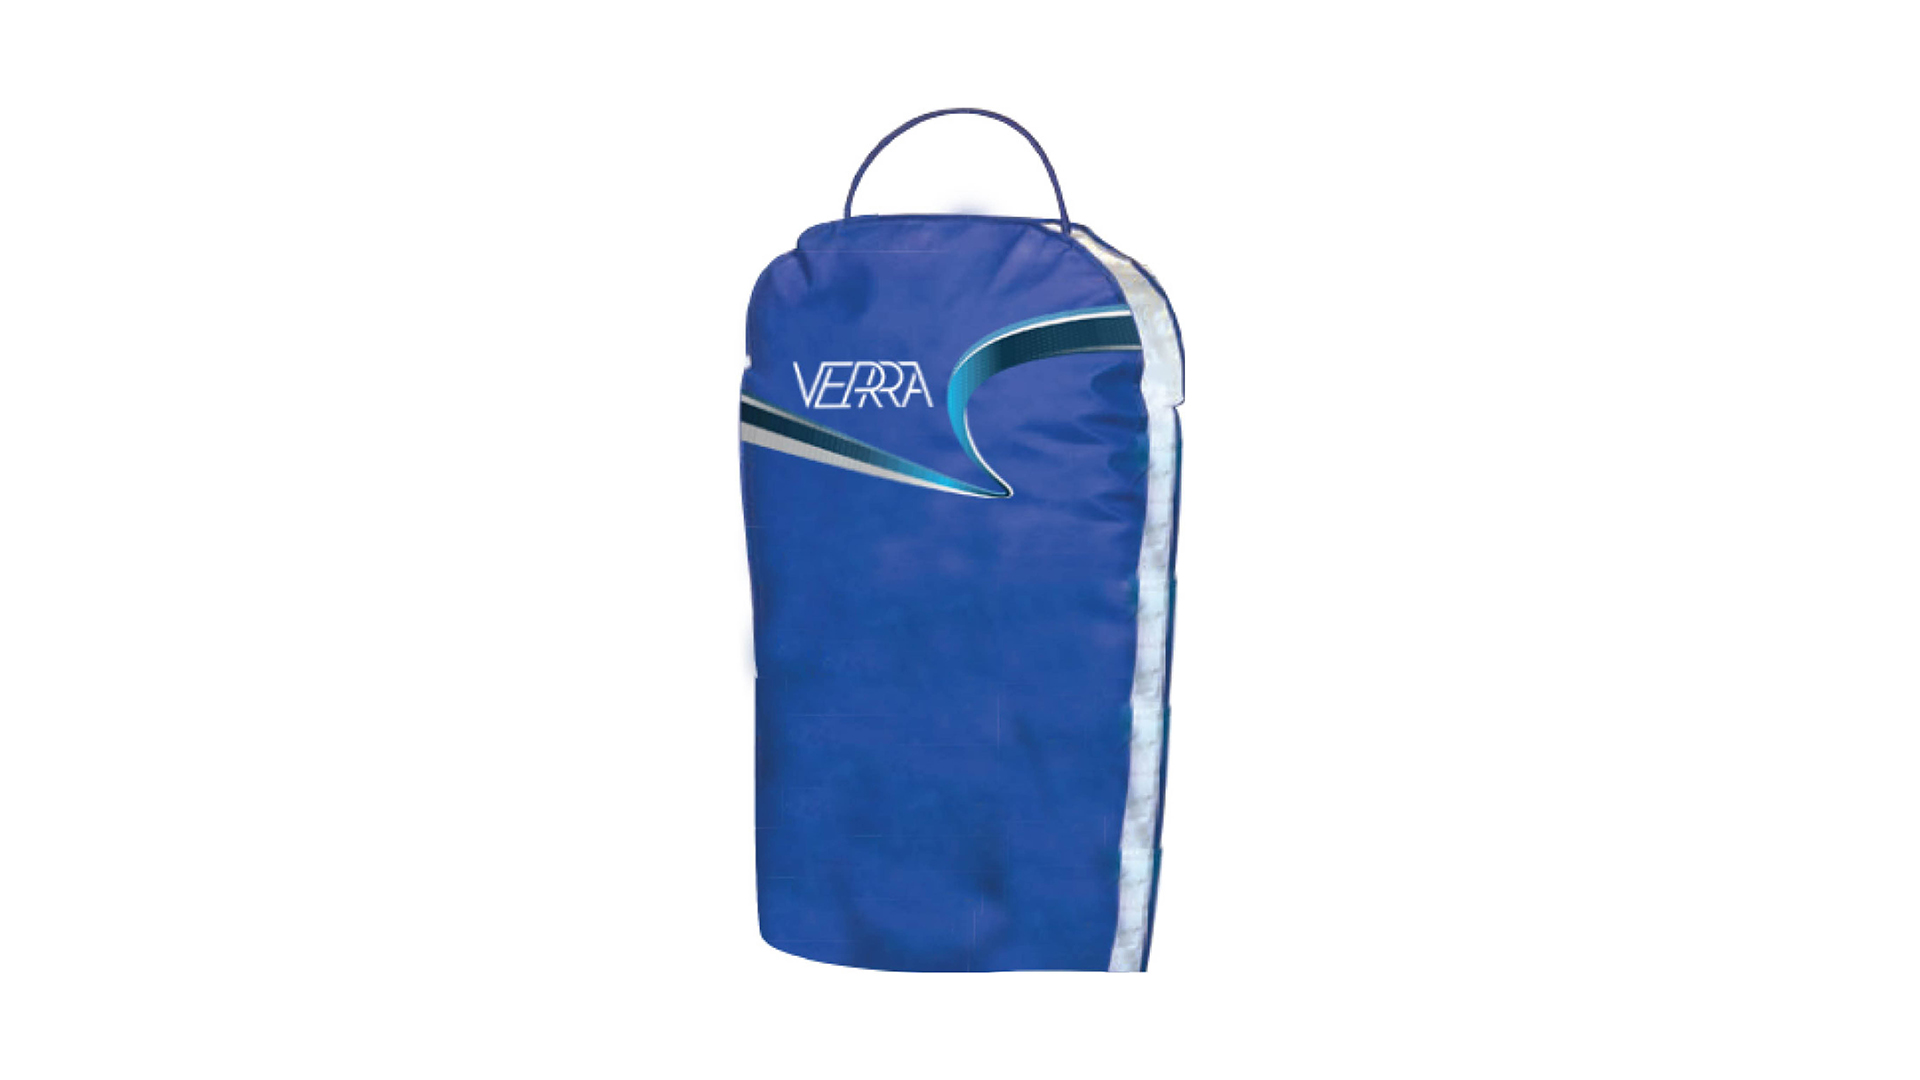 Pvc Nonwoven Bags For Baby Positione VB25